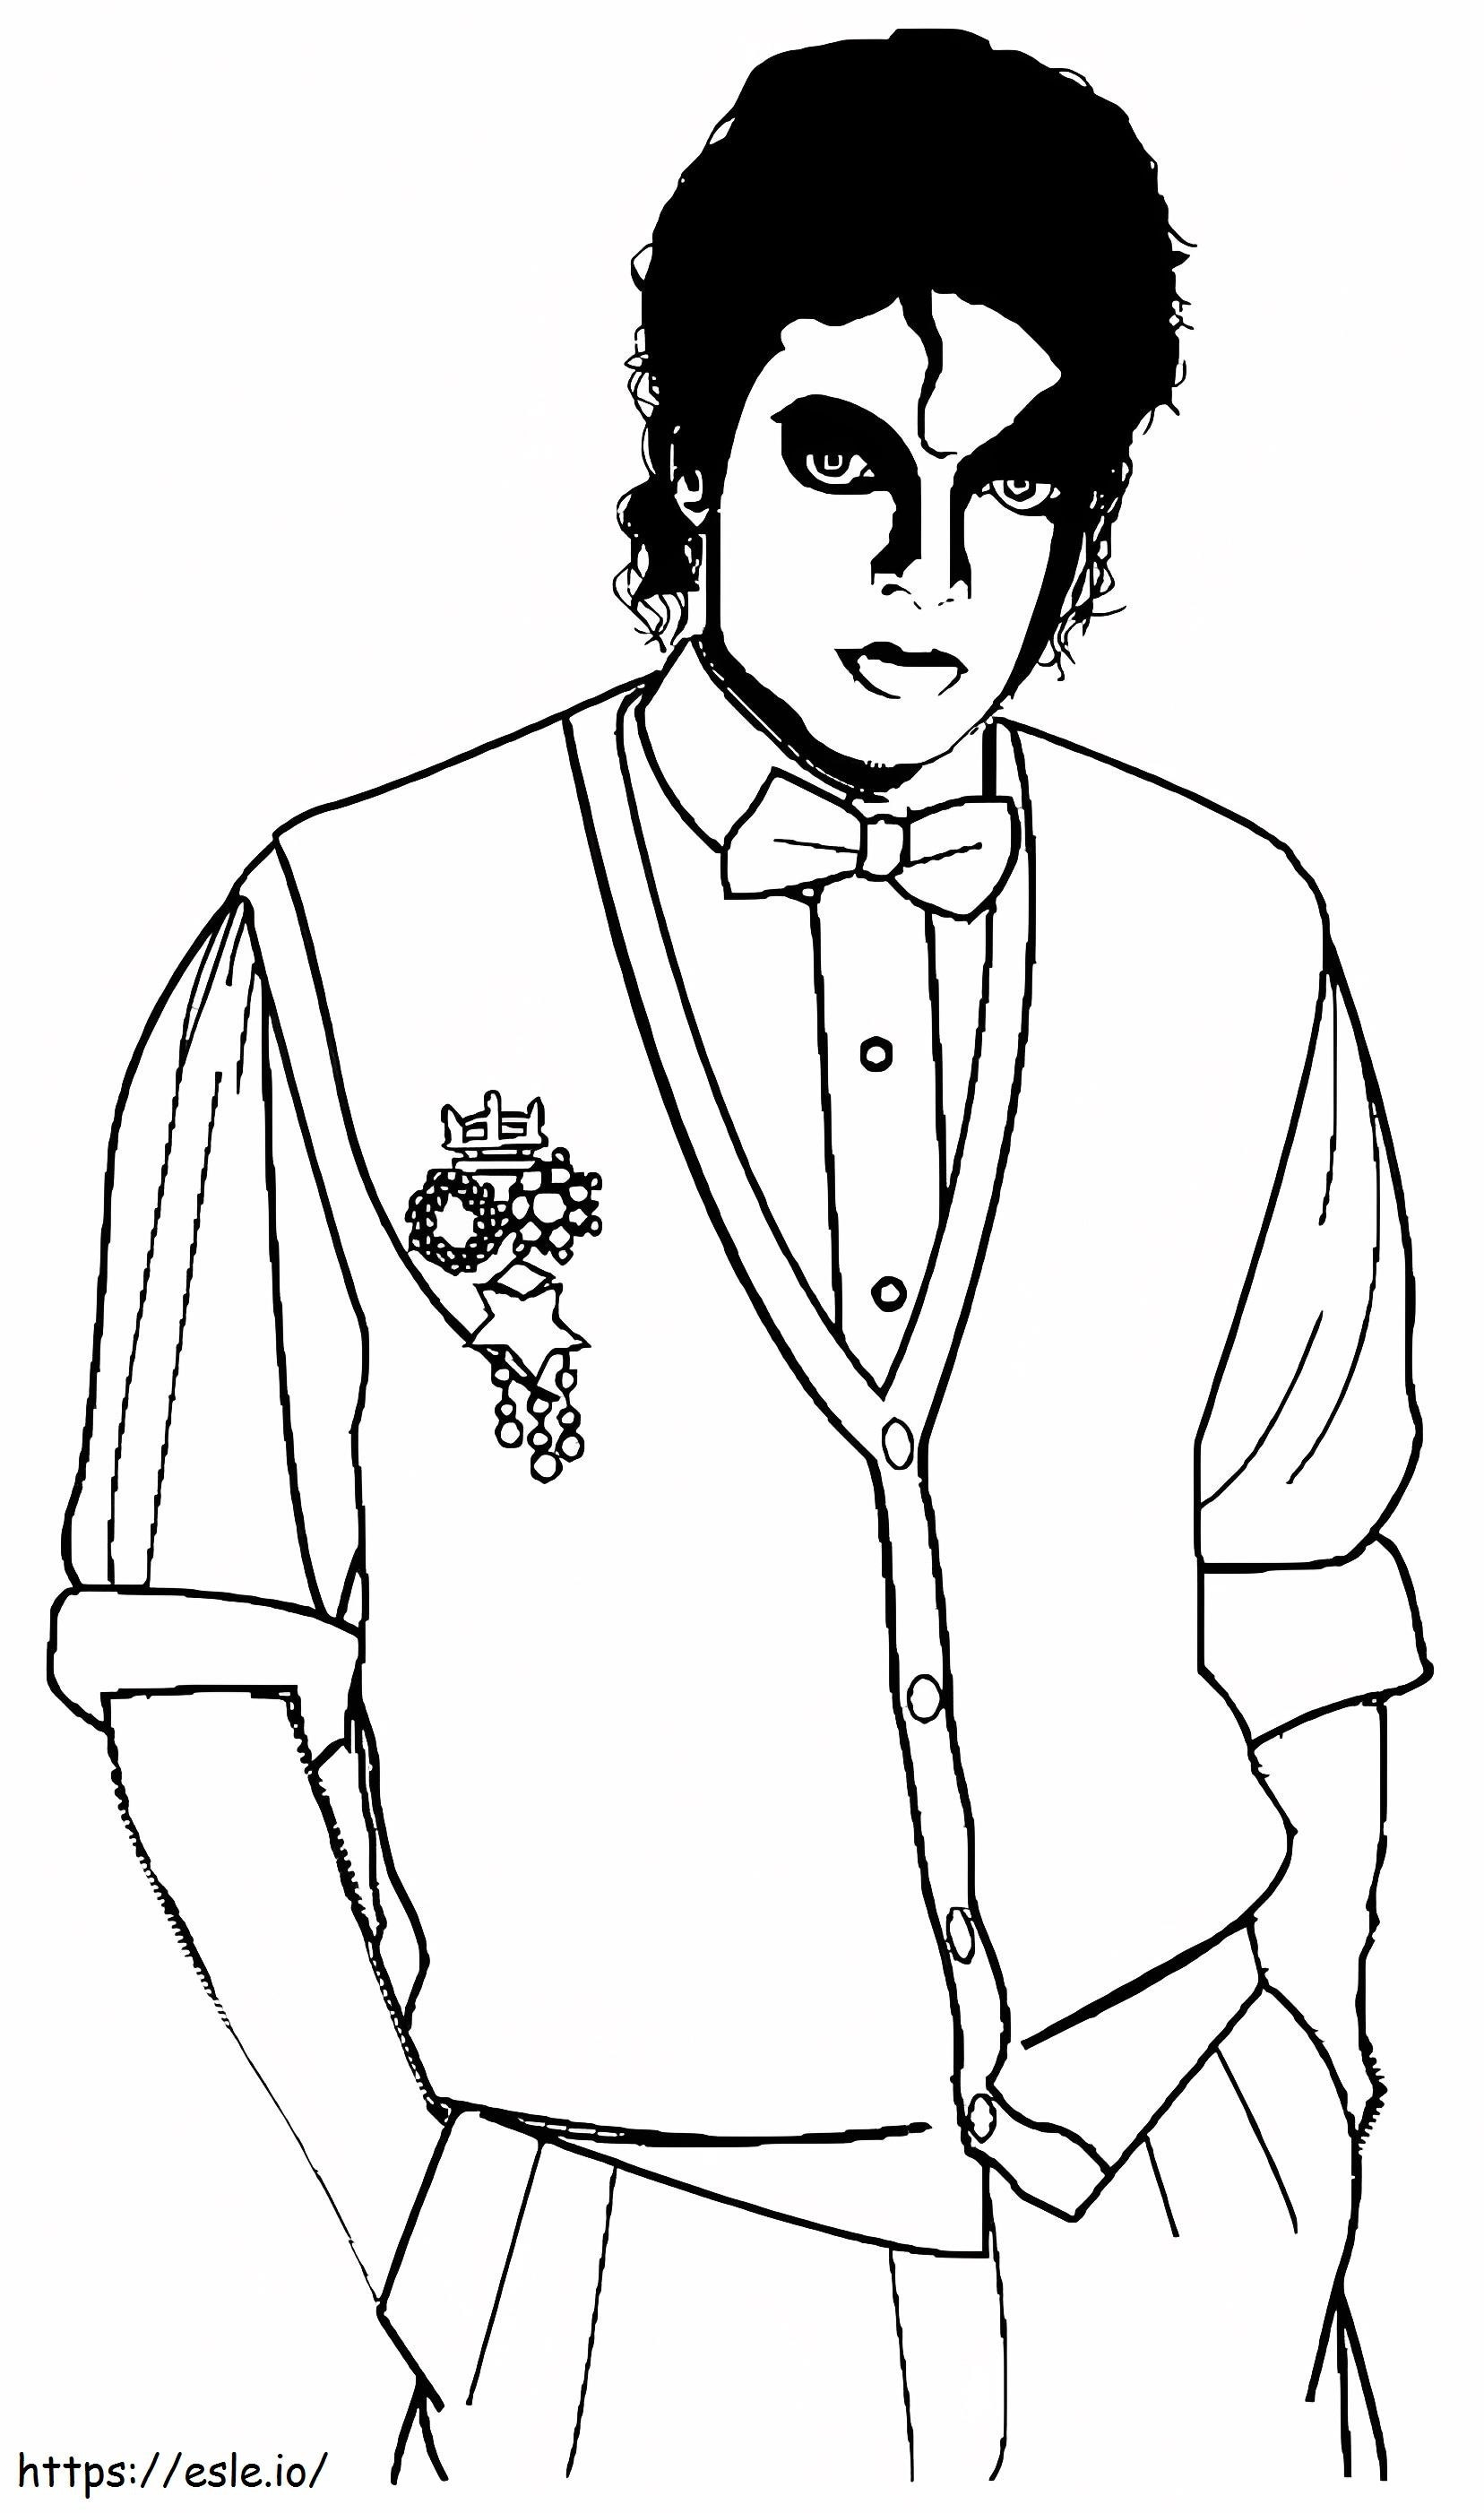 Handsome Michael Jackson coloring page